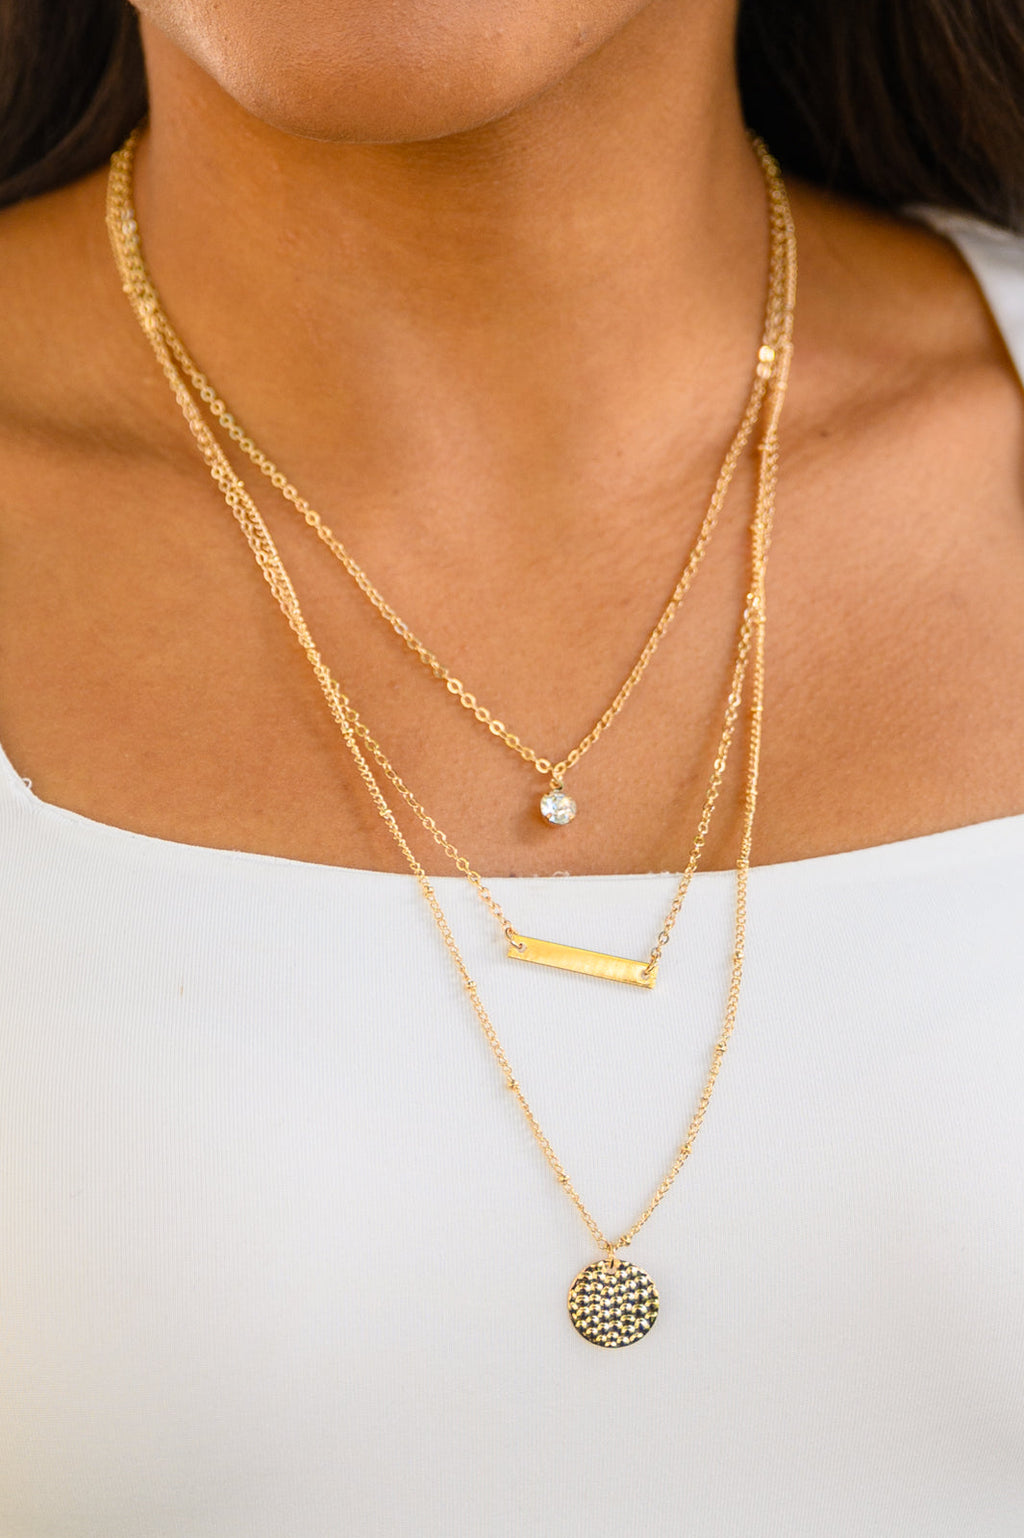 The Fine Art of Necklace Layering—Create Your Best Look!